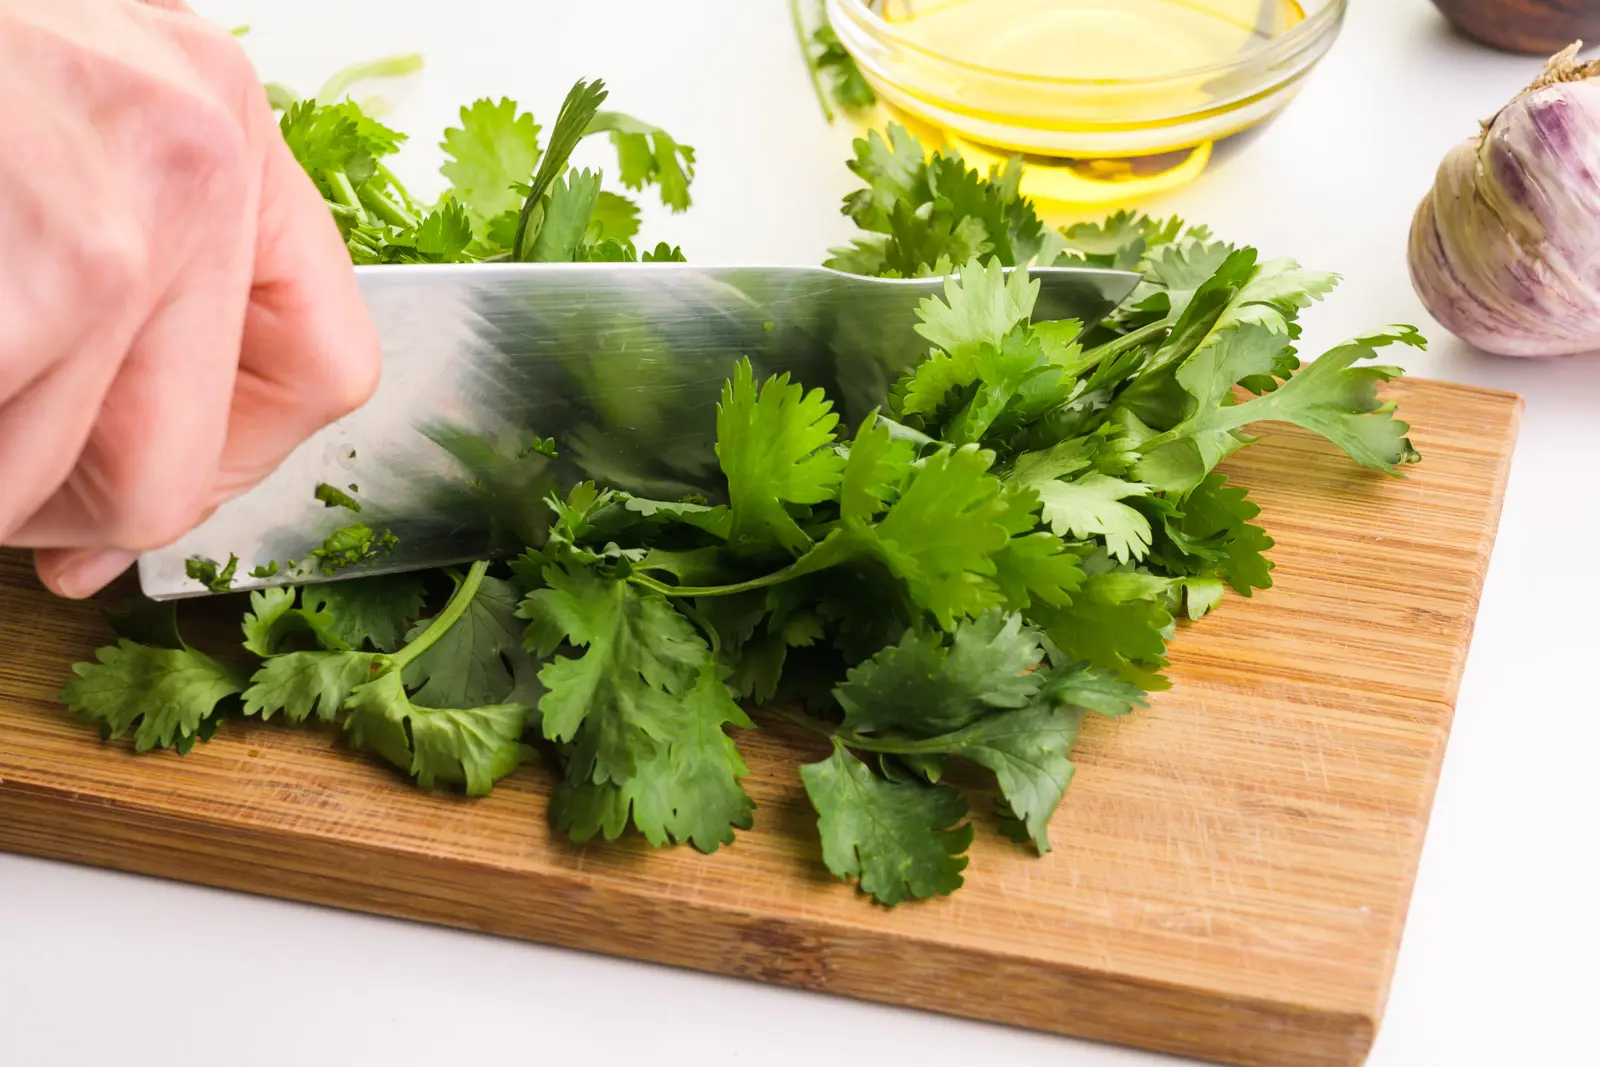 A hand holds a knife cutting cilantro on a wooden cutting board. There other ingredients in the background, such as a bowl of olive oil and garlic.